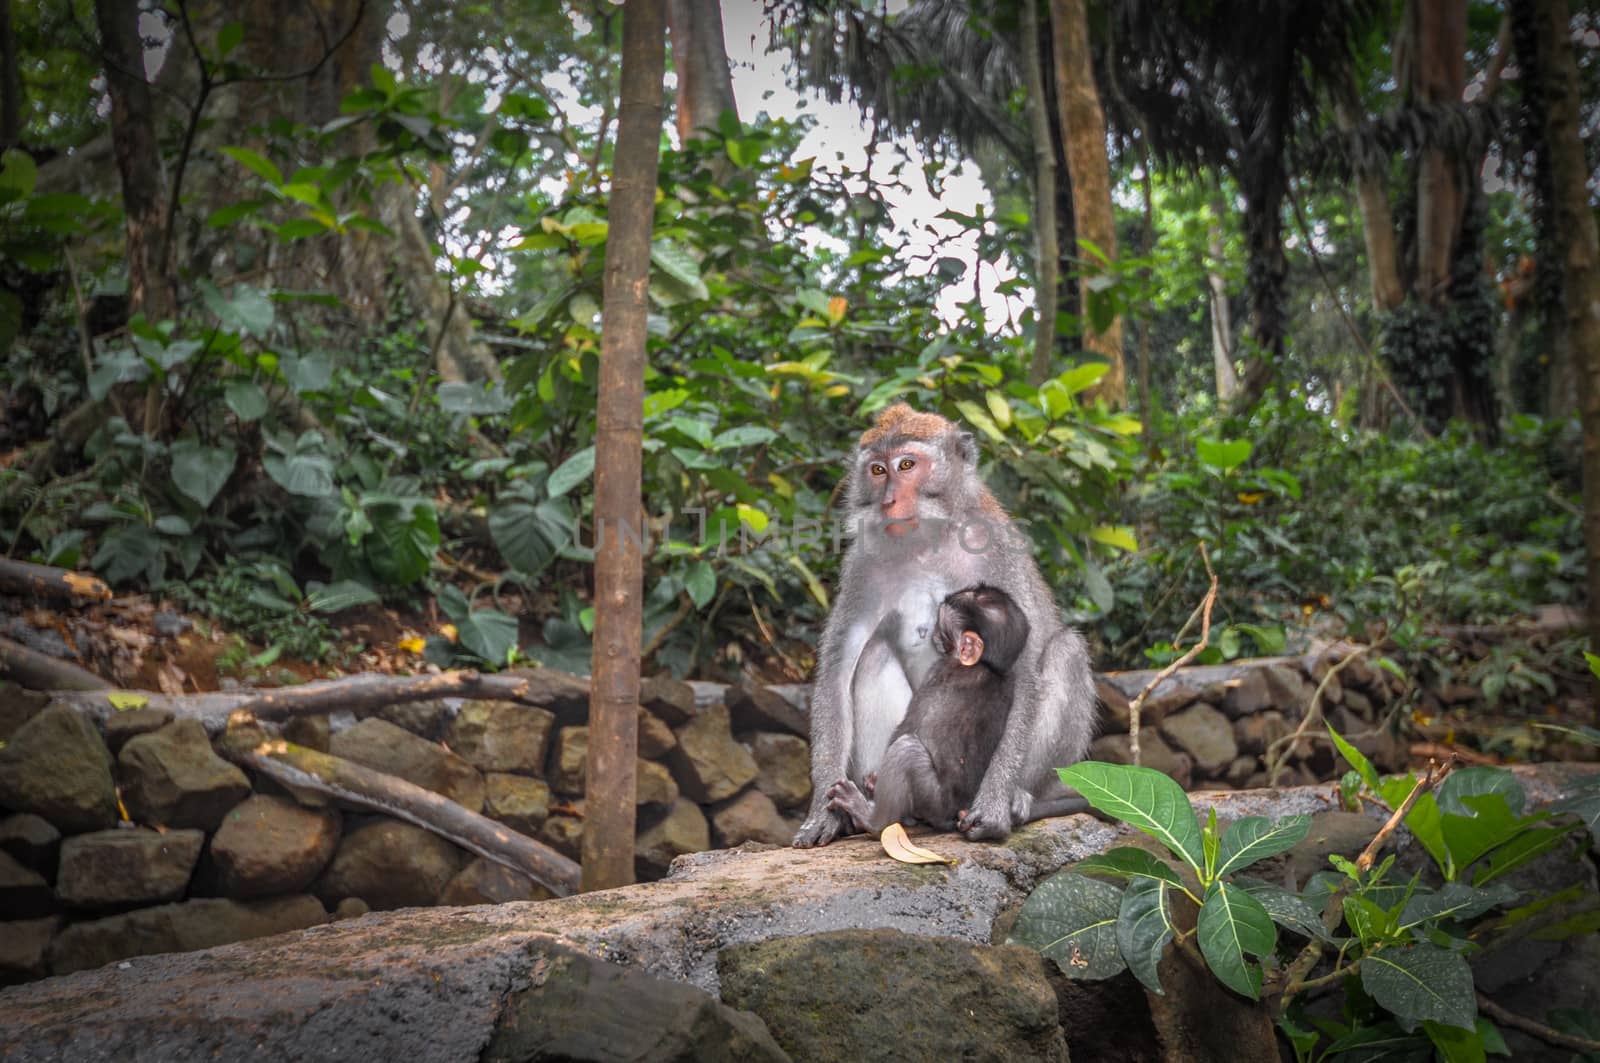 Long-tailed macaques (Macaca fascicularis) in Sacred Monkey Forest, Ubud, Indonesia